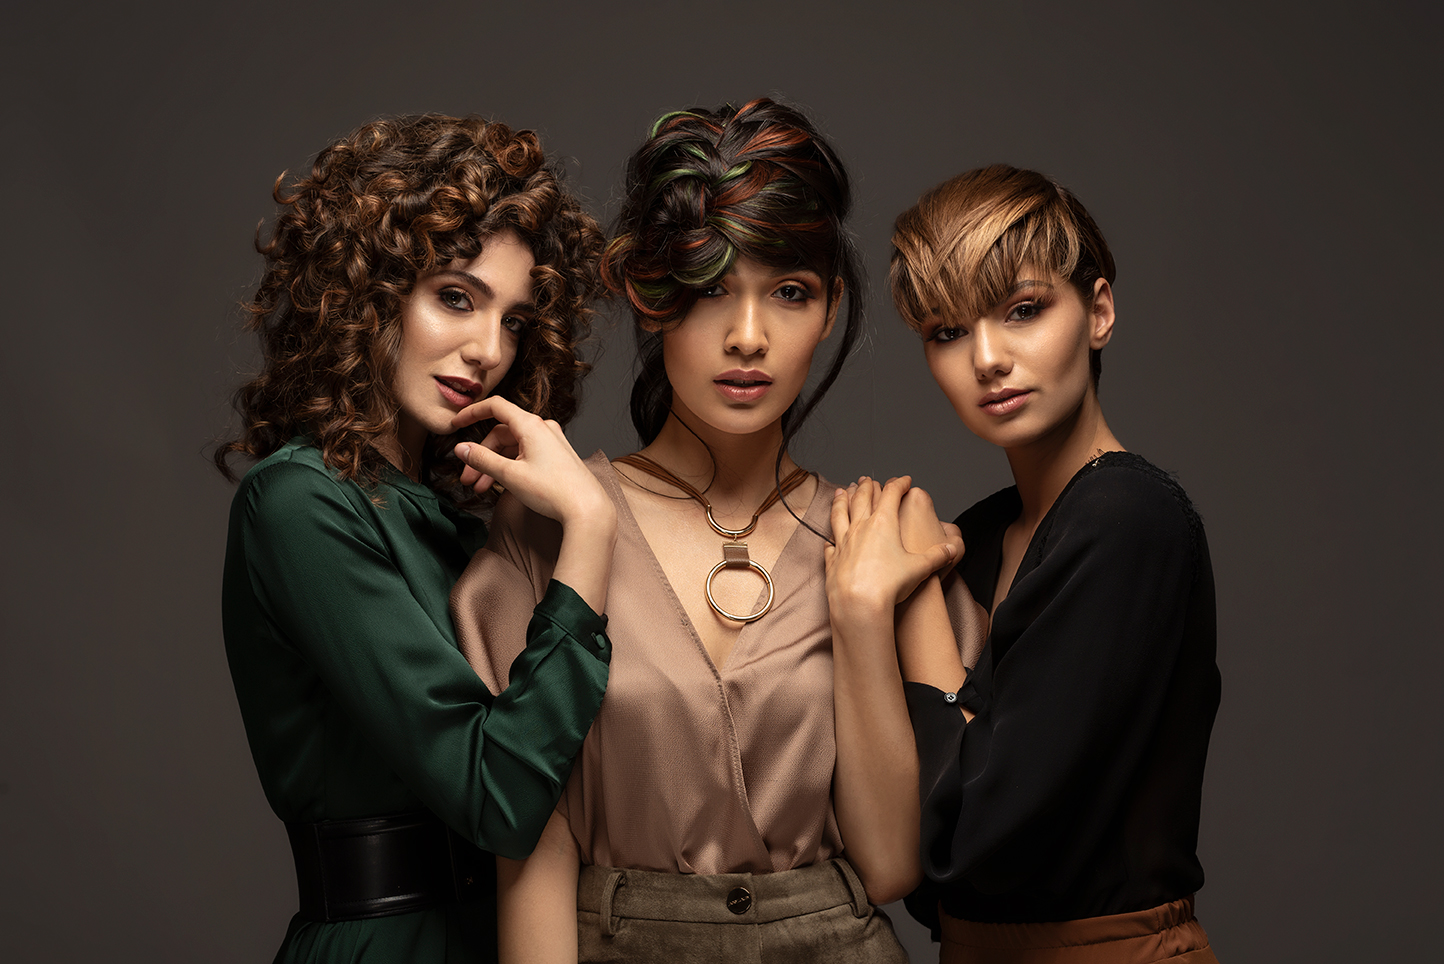 Campaign for a hair brand, showing styling in earthy tones.